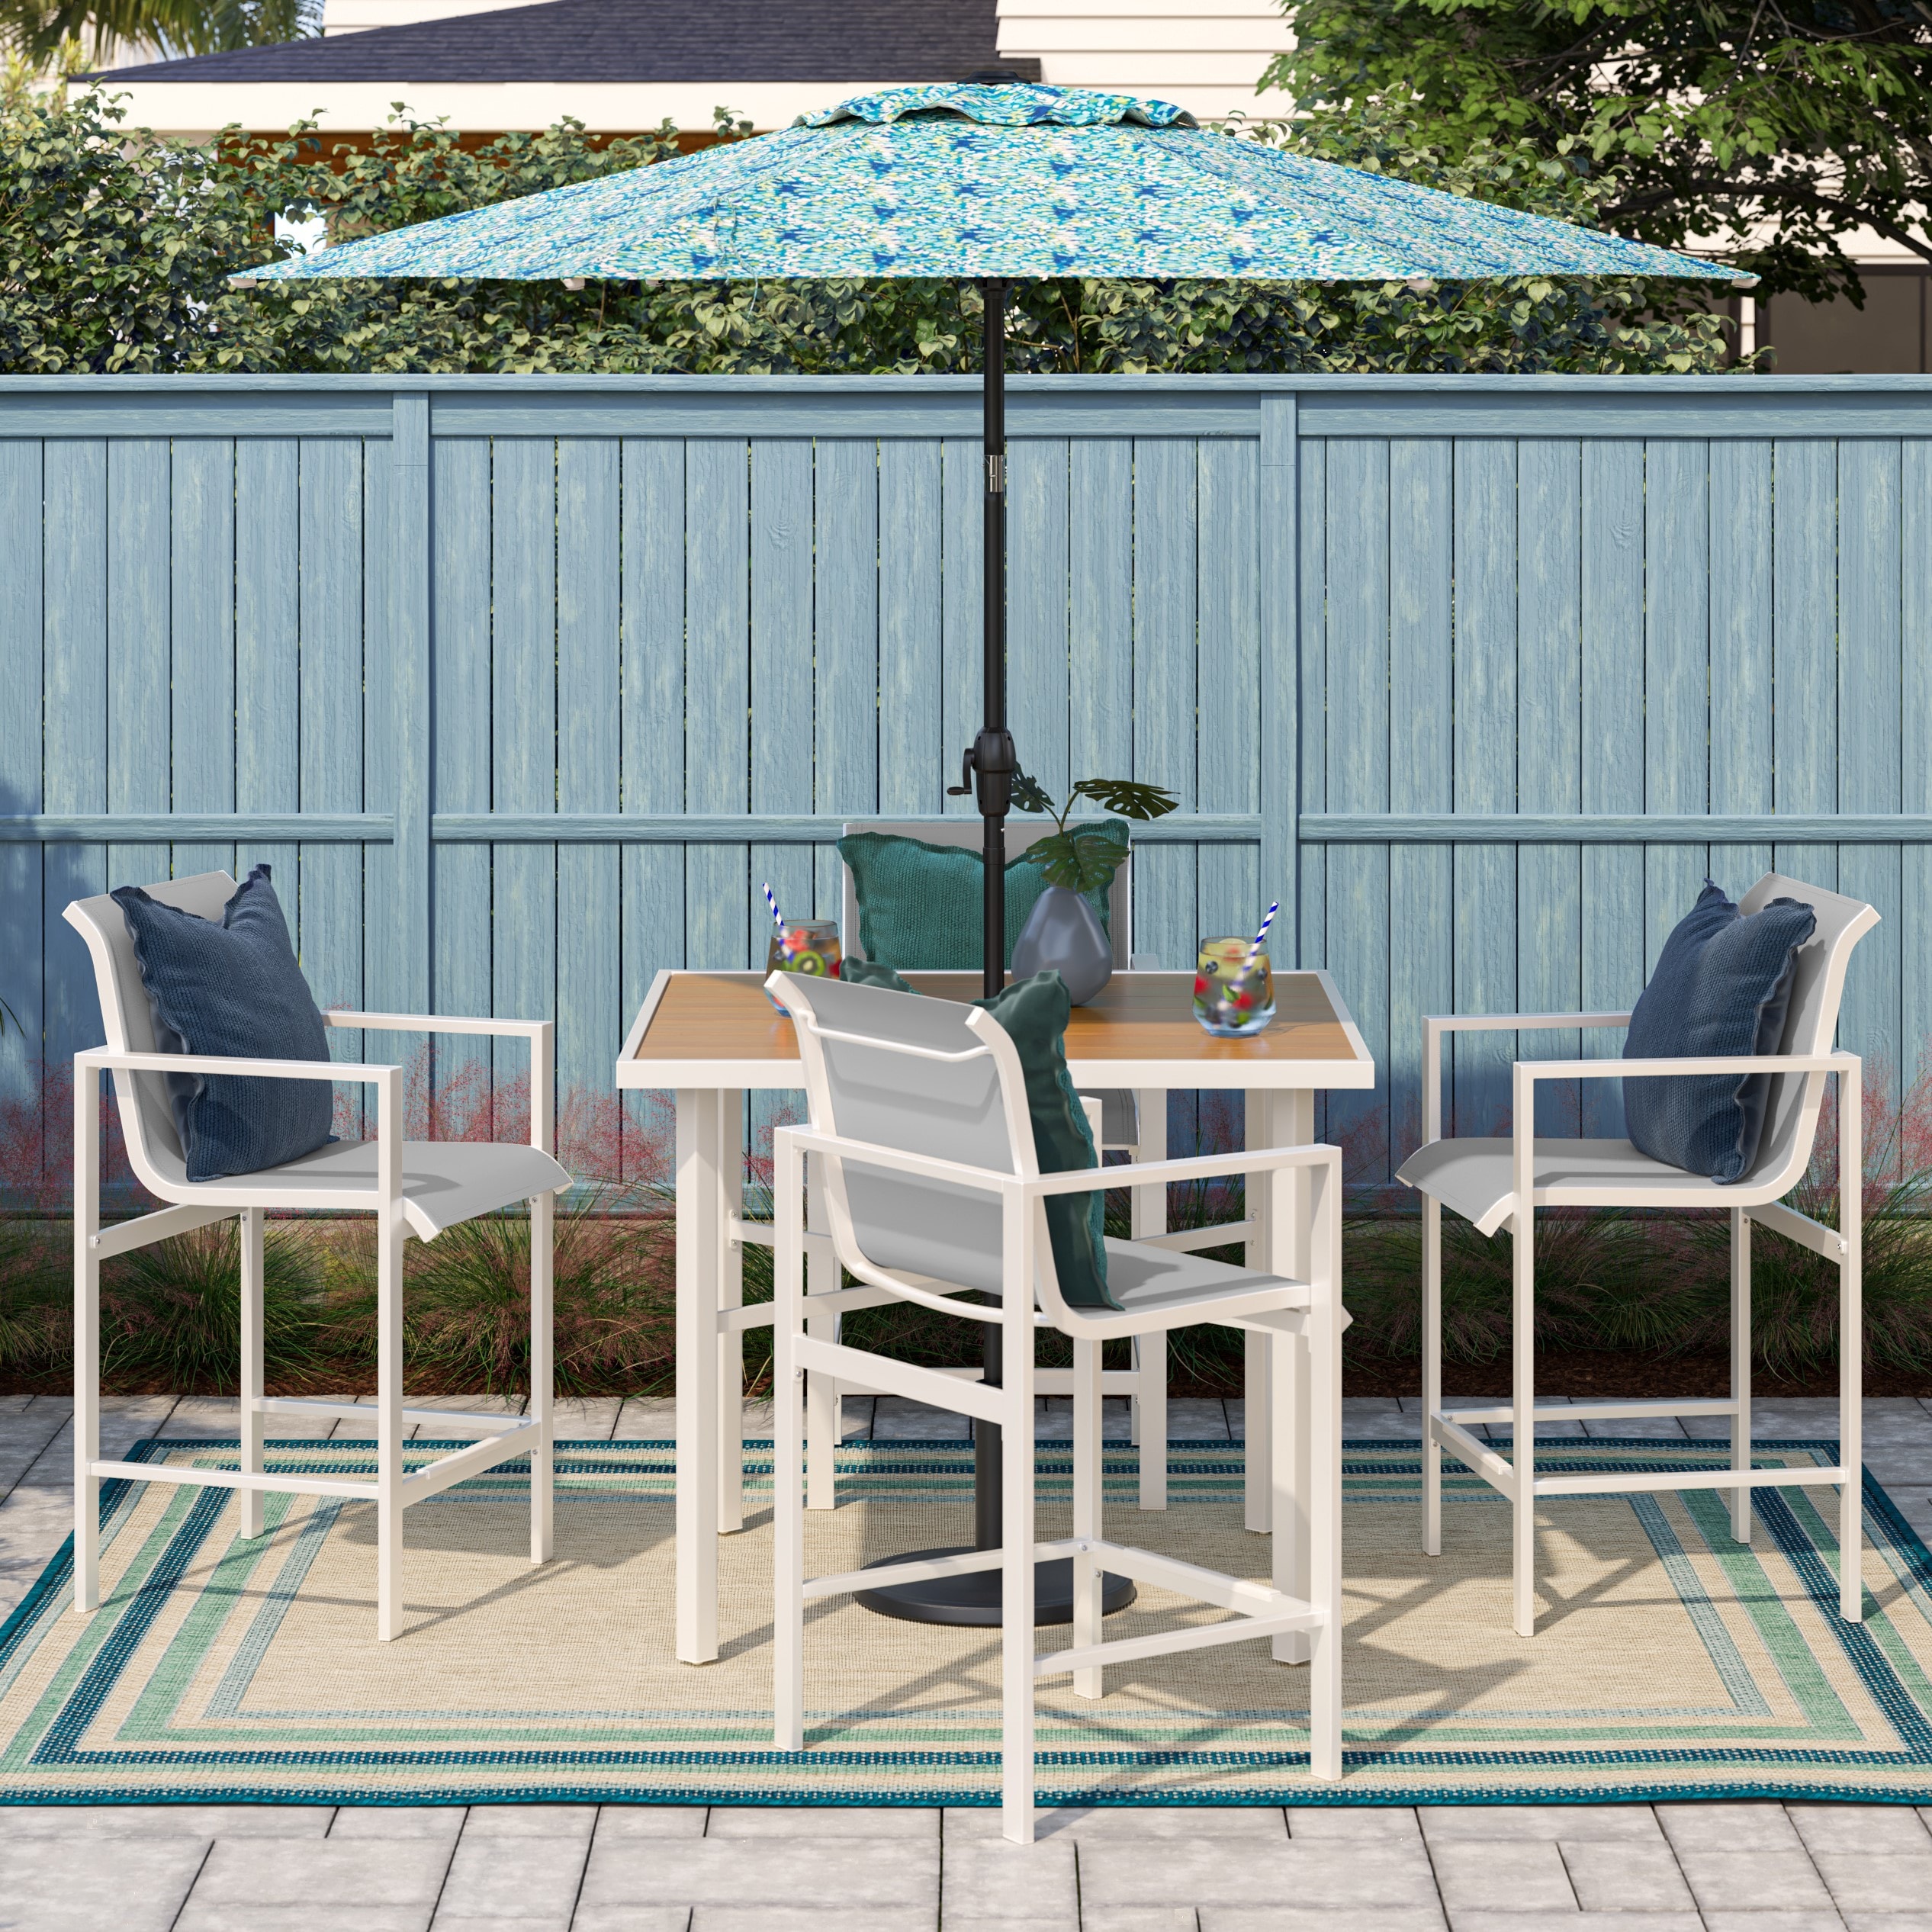 Patio Premier 16 in. L x 15 in. W x 2.5 H Square Outdoor Dining